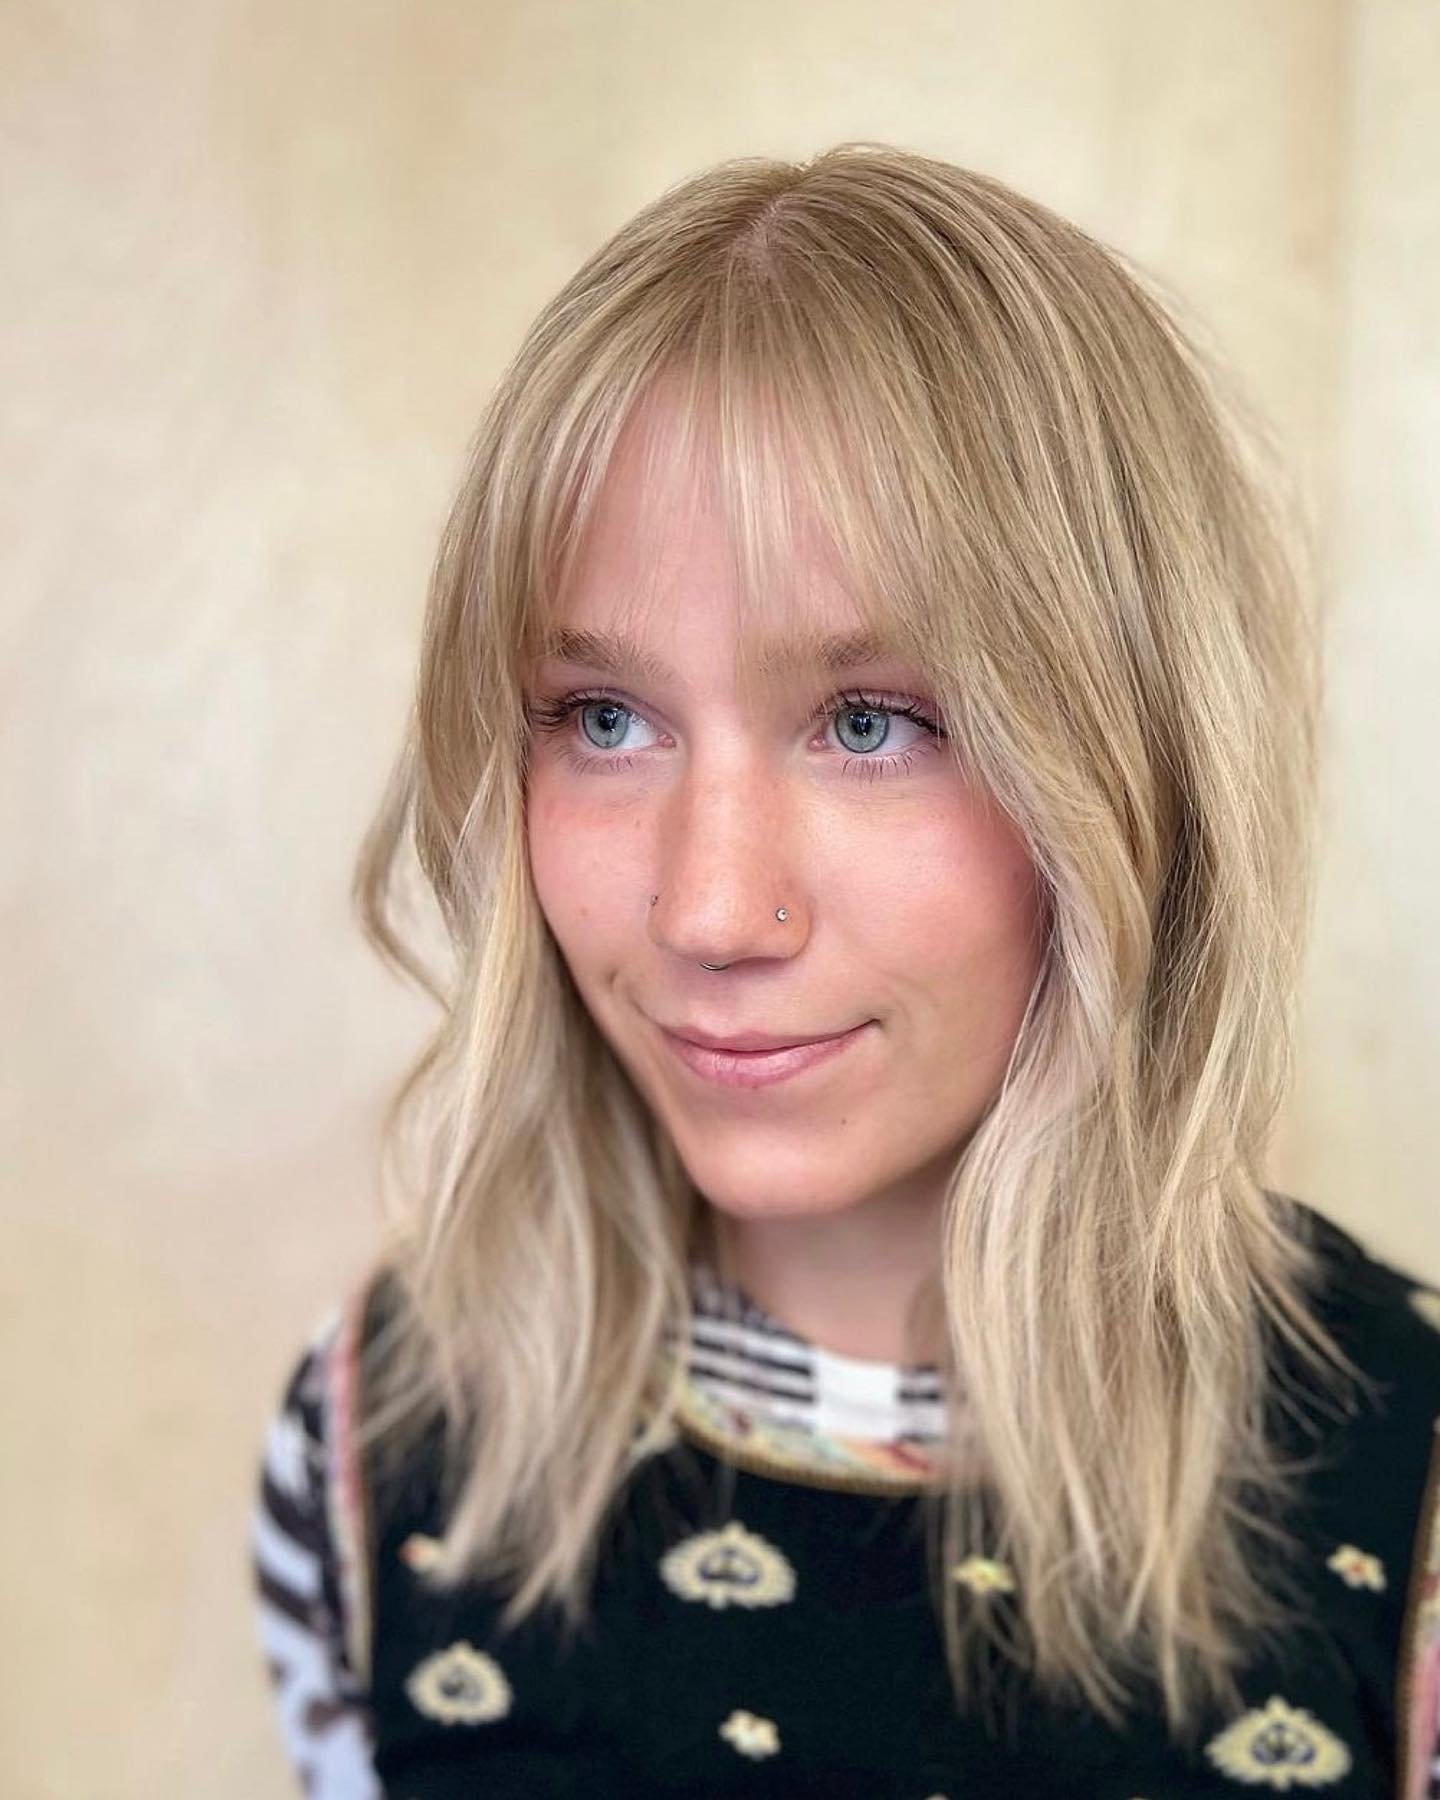 A @rachelcampbellhair Roundup &mdash; Blonde edition! If you&rsquo;re a hair enthusiast you know, just how hard a natural blonde is to achieve. We&rsquo;re so lucky to have a team of amazing colourists.
⠀⠀⠀⠀⠀⠀⠀⠀⠀
Let&rsquo;s get your butt in our chai